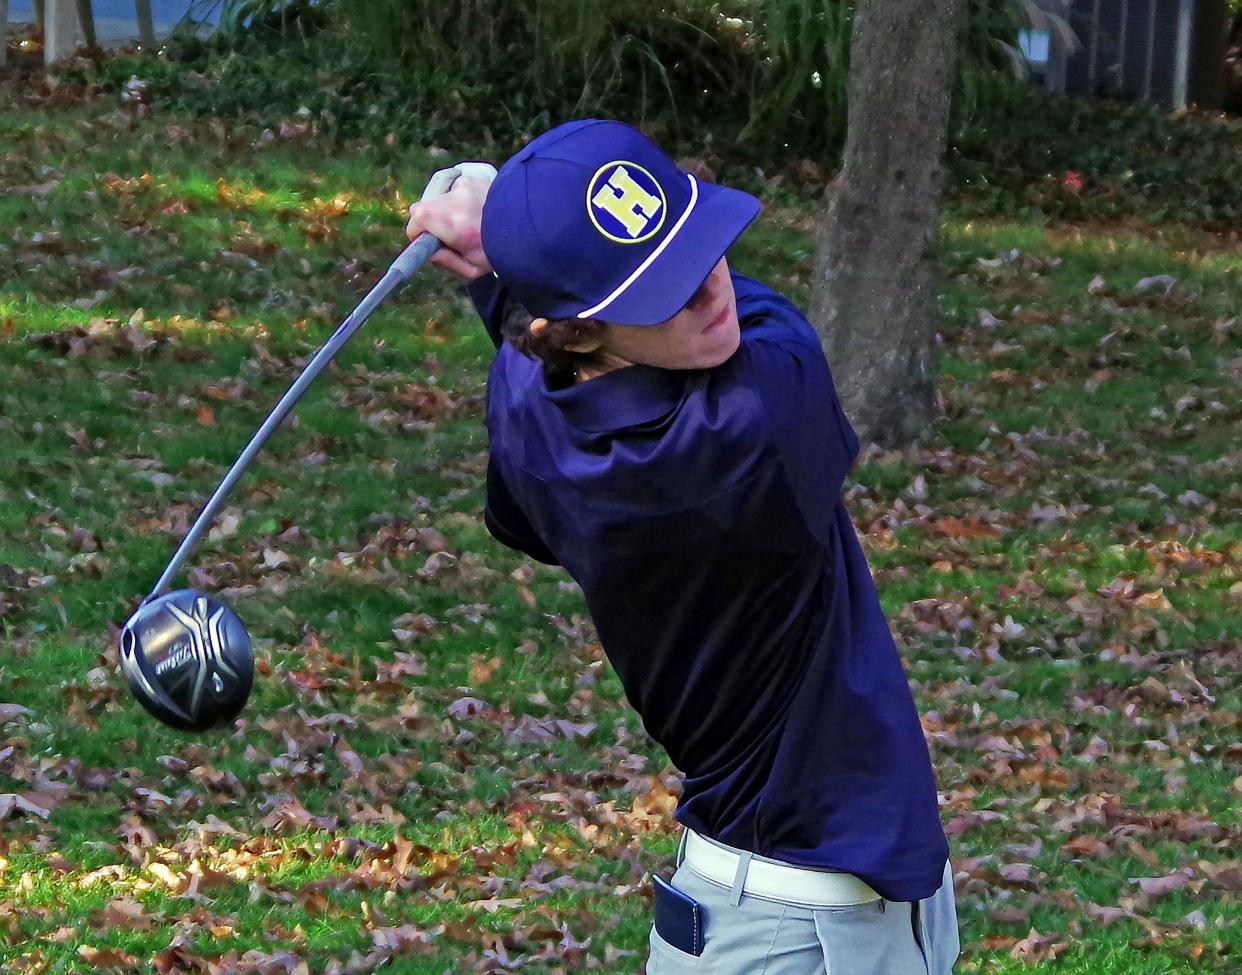 Chris Doherty of Hanover watches the sail of his drive from the 12th tee during the Div 2 Tourney at Thorny Lea golf course in Brockton on Tuesday, Oct. 31, 2023.